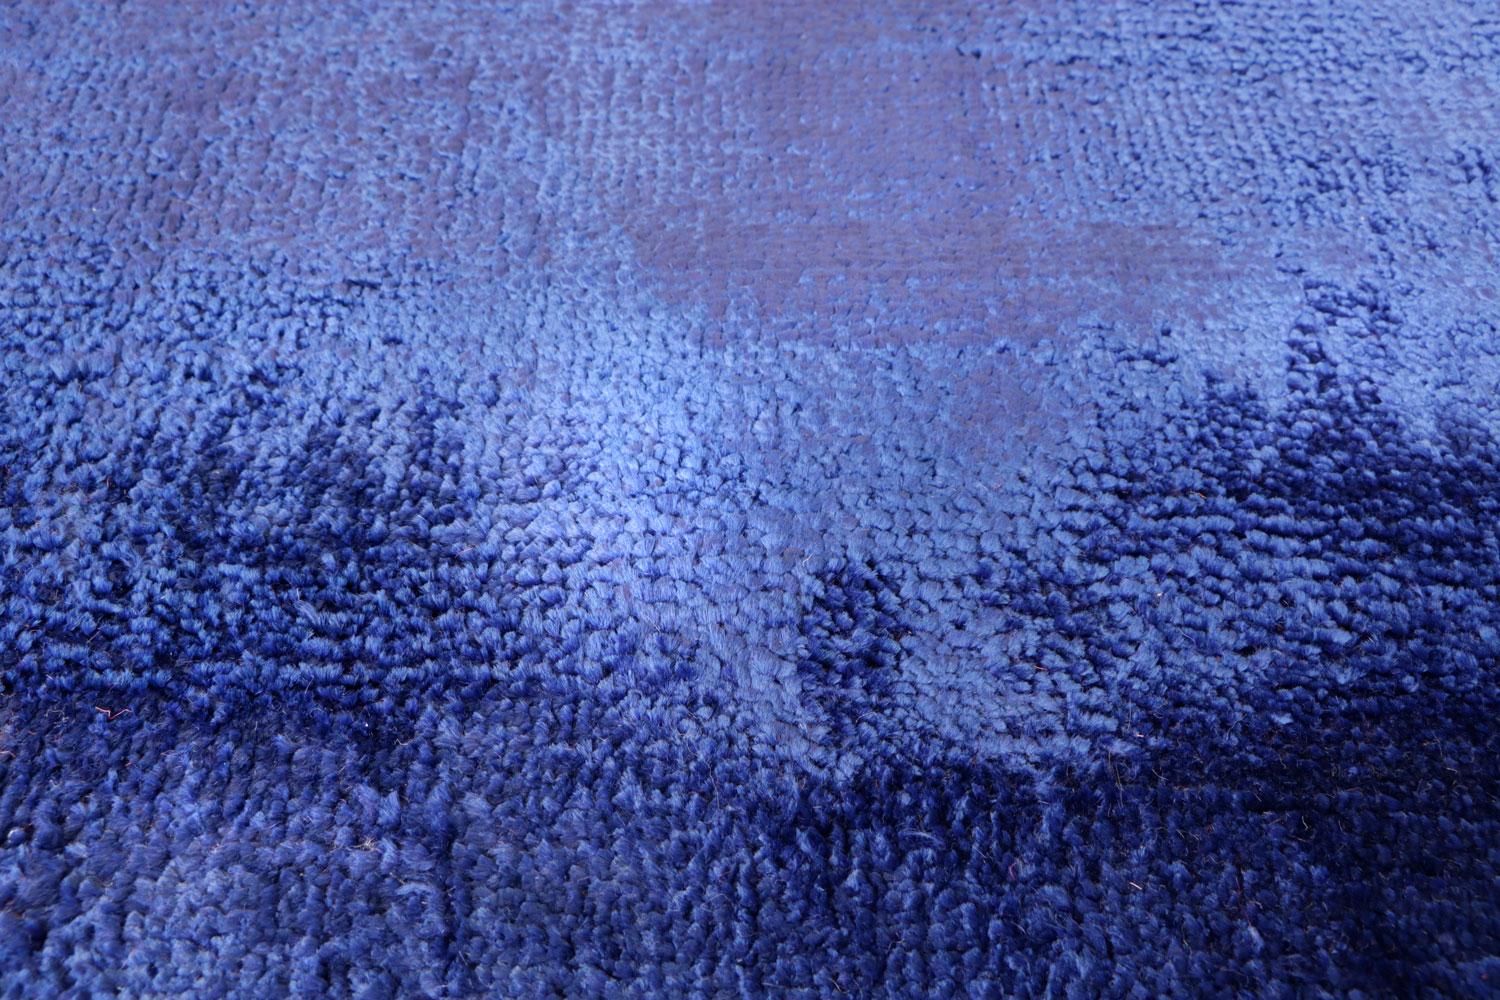 Indian 21st Century Handwoven Shiny Velvety Blue Rug by Deanna Comellini 170x240 cm For Sale